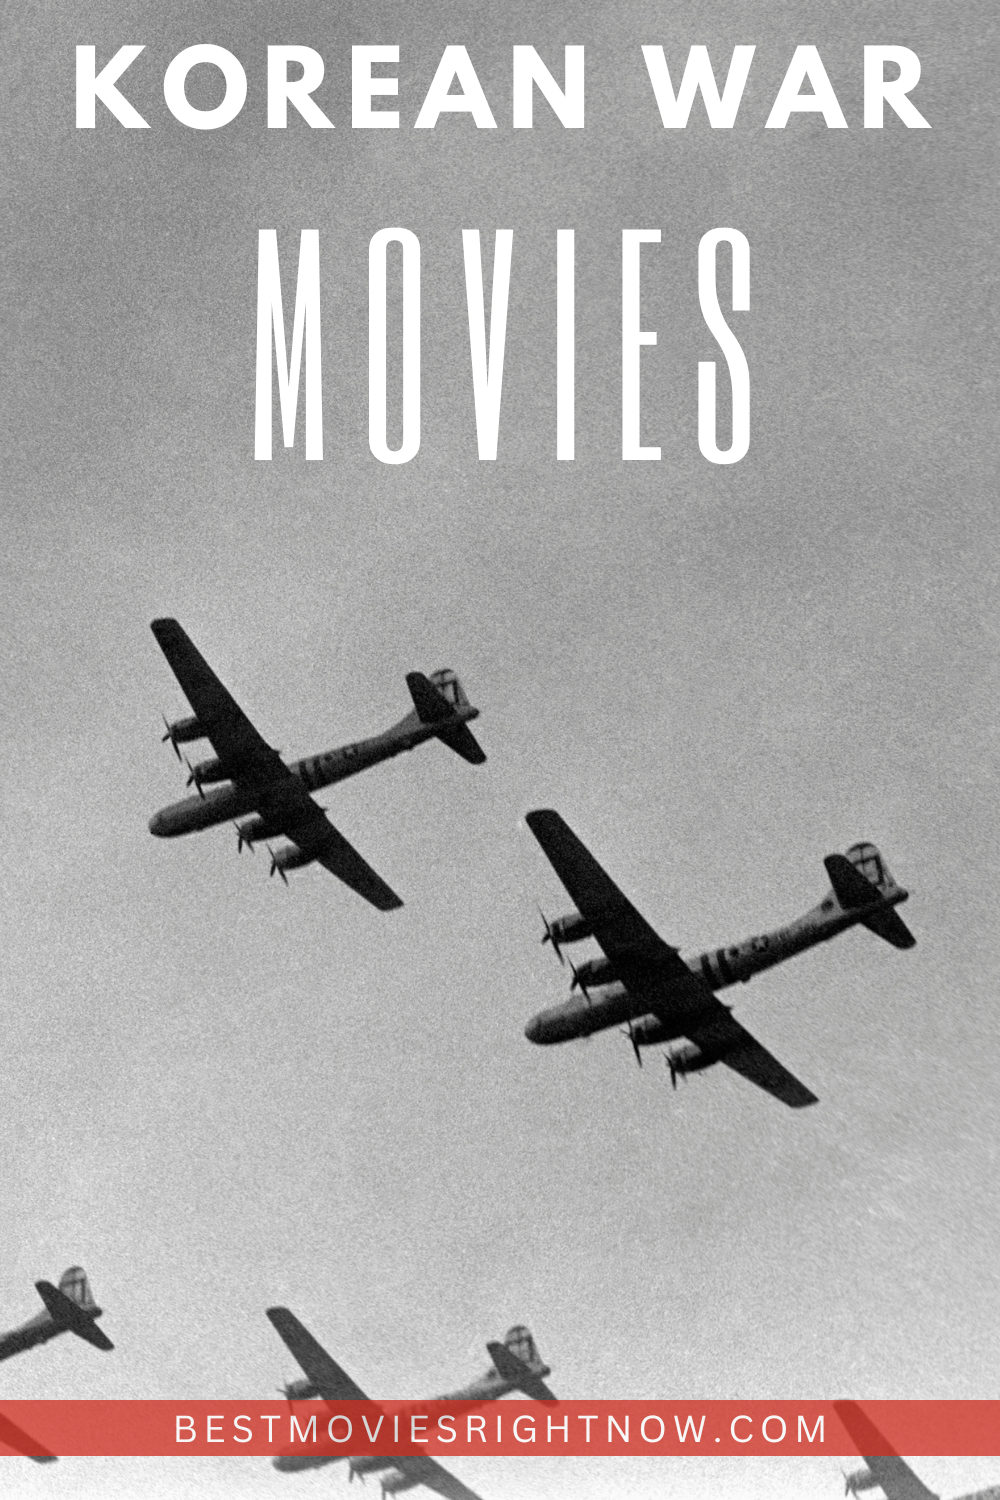 War scene of planes in the sky with text: "Korean War Movies"